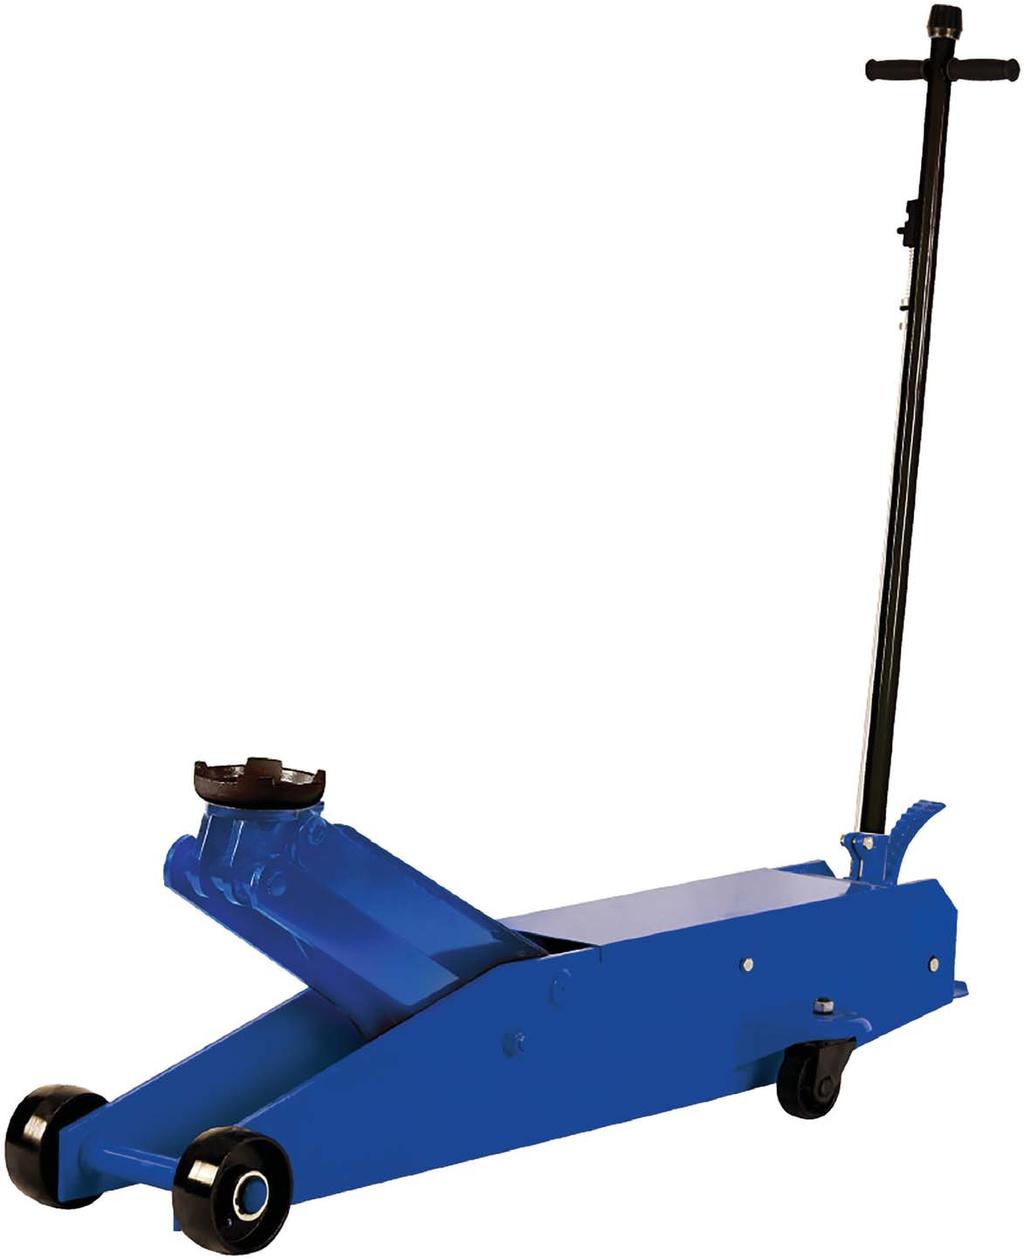 ATD-7391A 10-Ton Long Chassis Service Jack Owner s Manual Specifications Features: Made